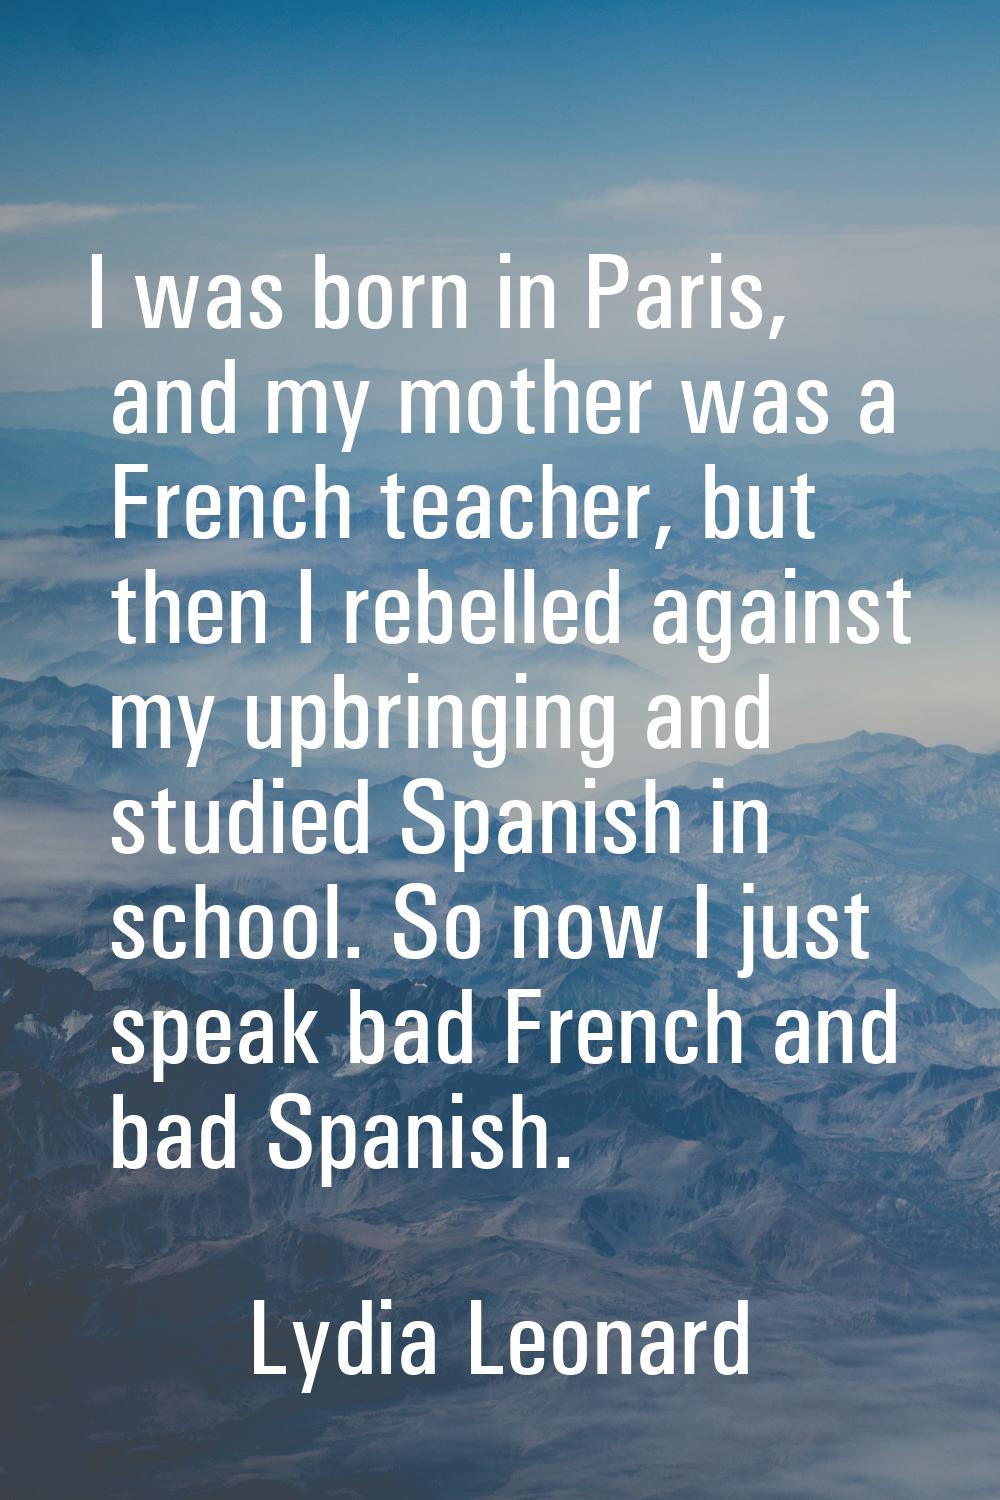 I was born in Paris, and my mother was a French teacher, but then I rebelled against my upbringing 